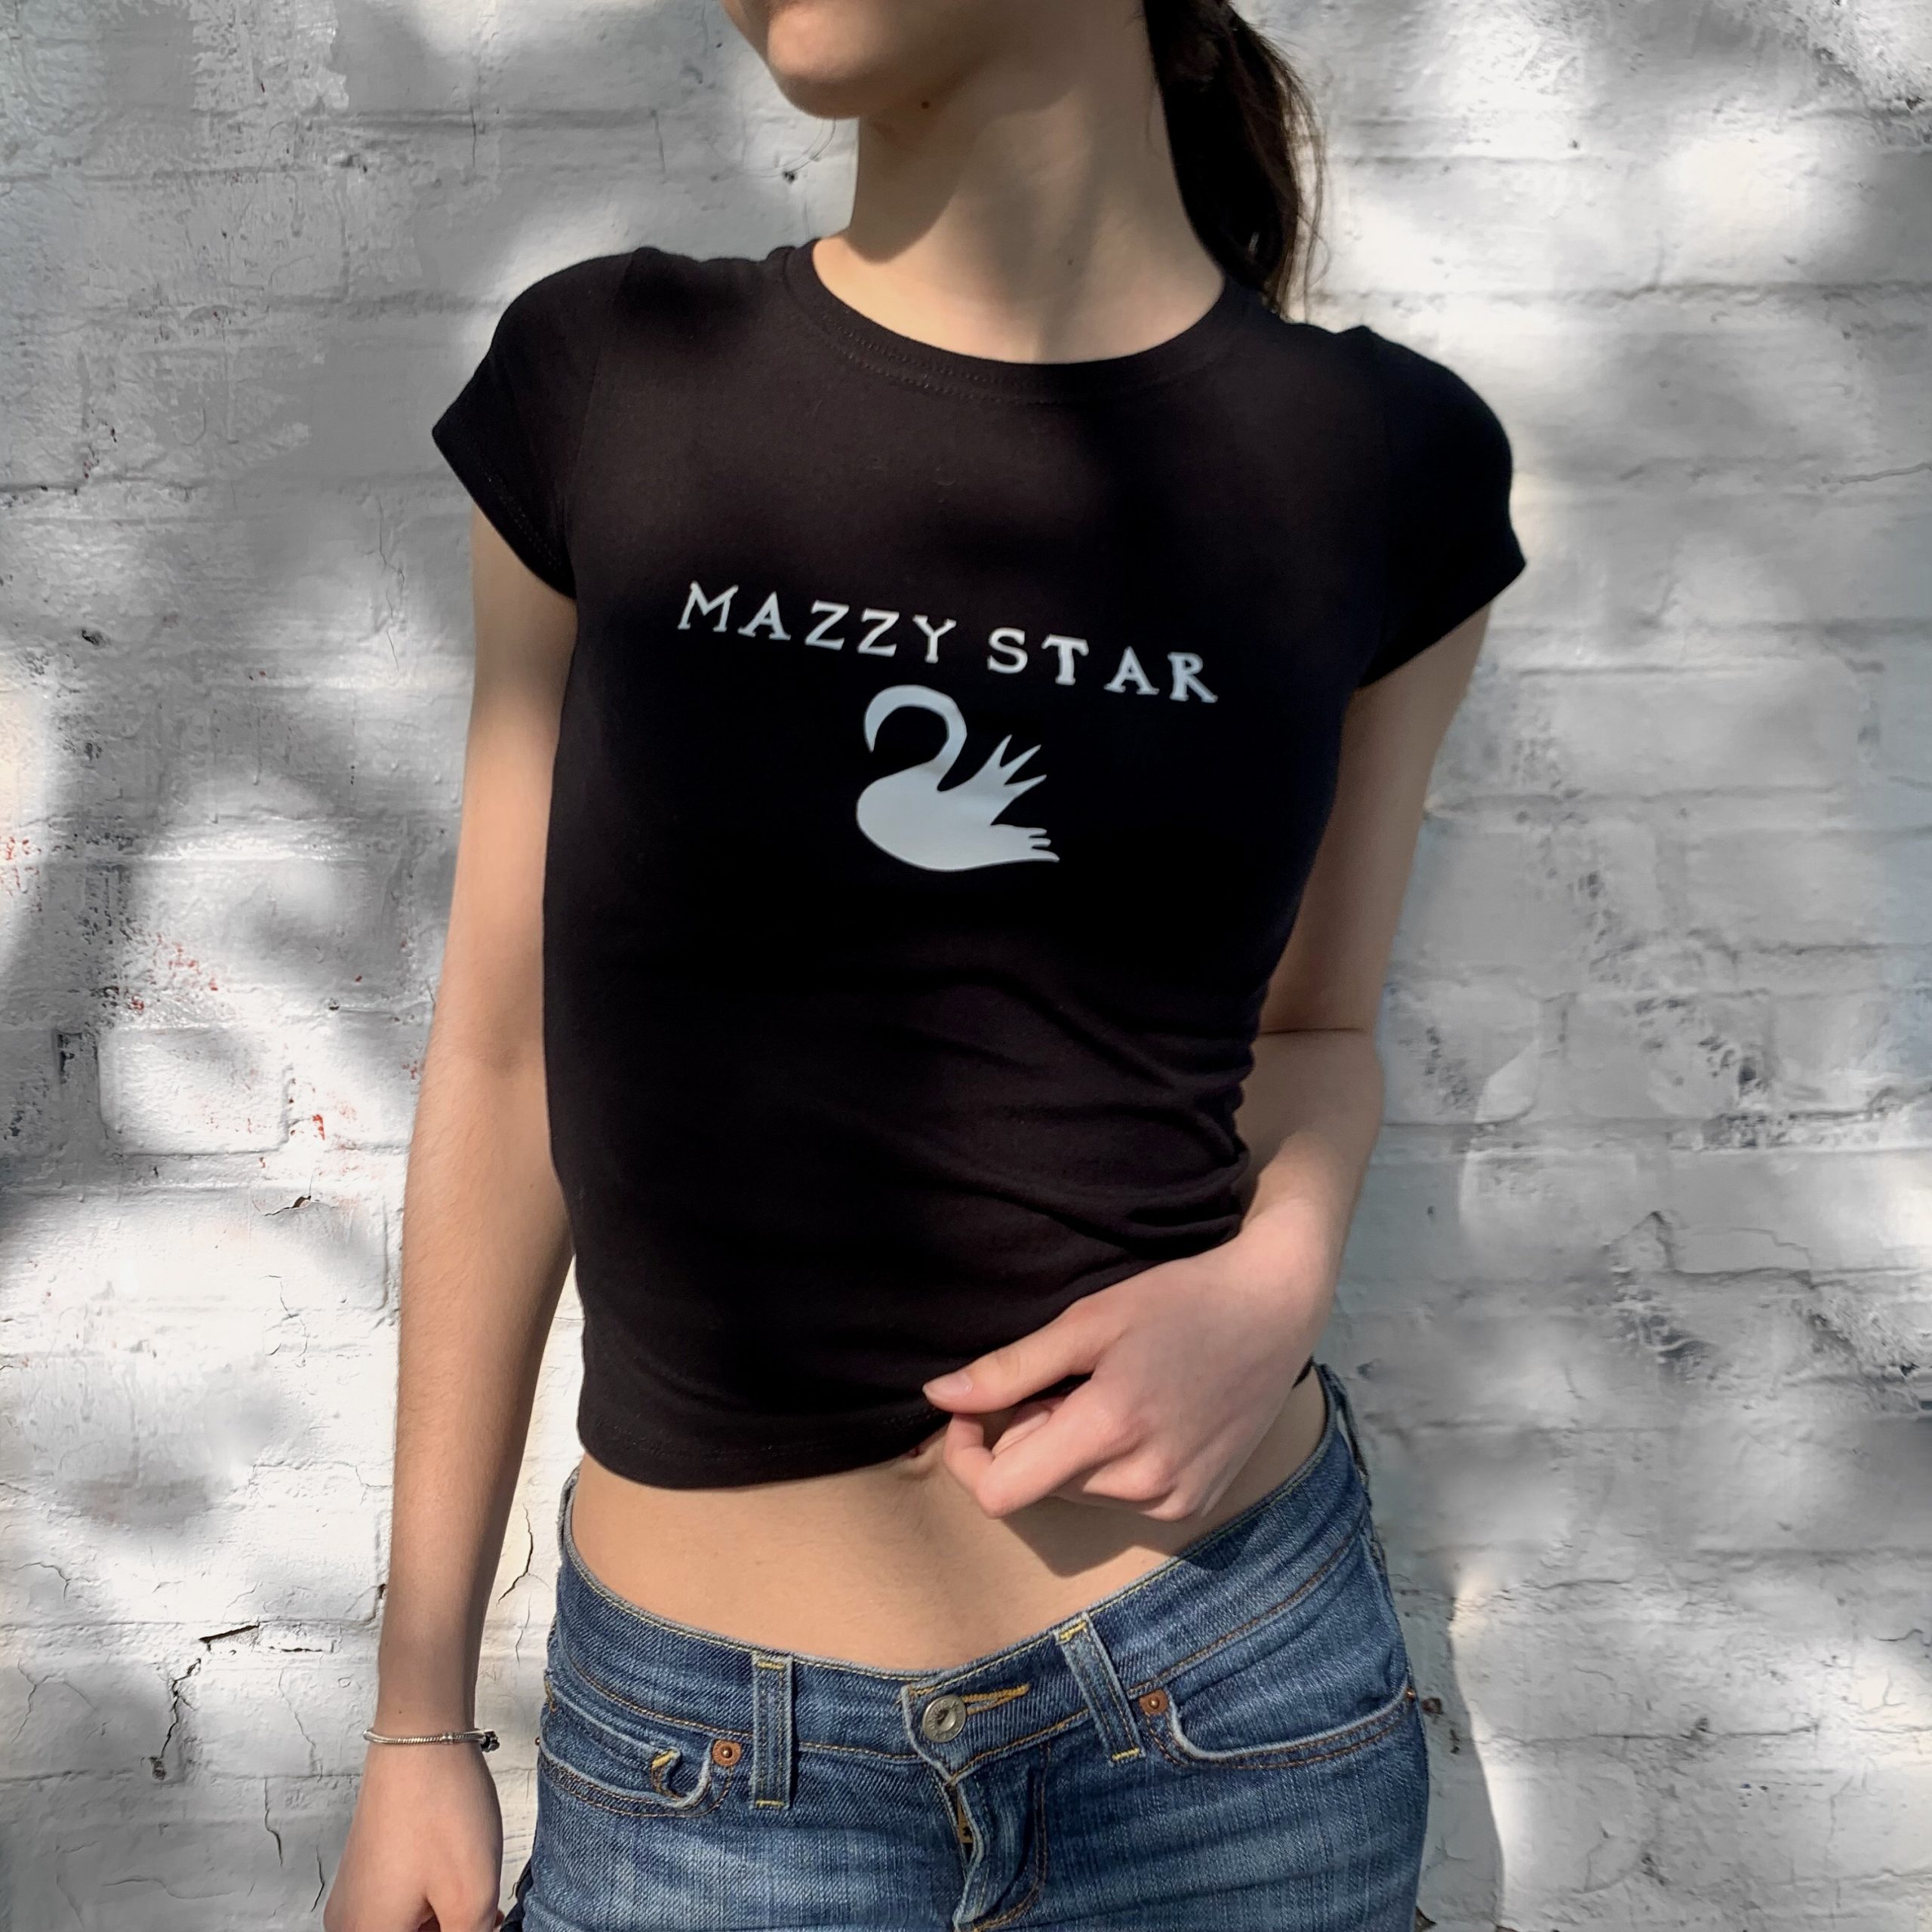 Vintage-inspired Mazzy Star baby tee for Y2K fashion lovers